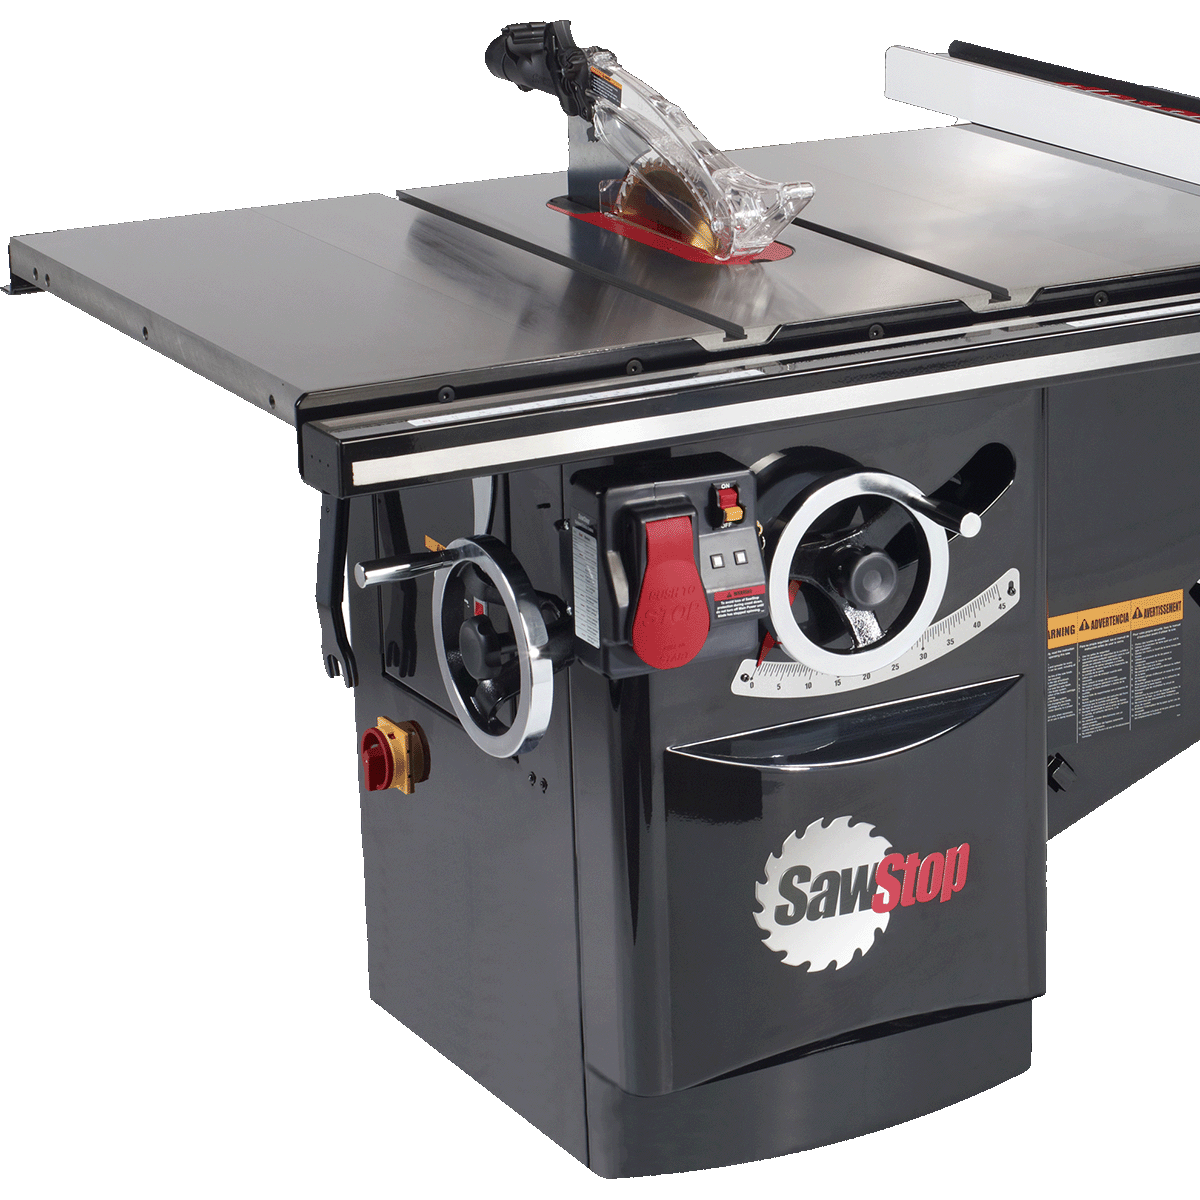 Sawstop Table Saws | The Forest Store